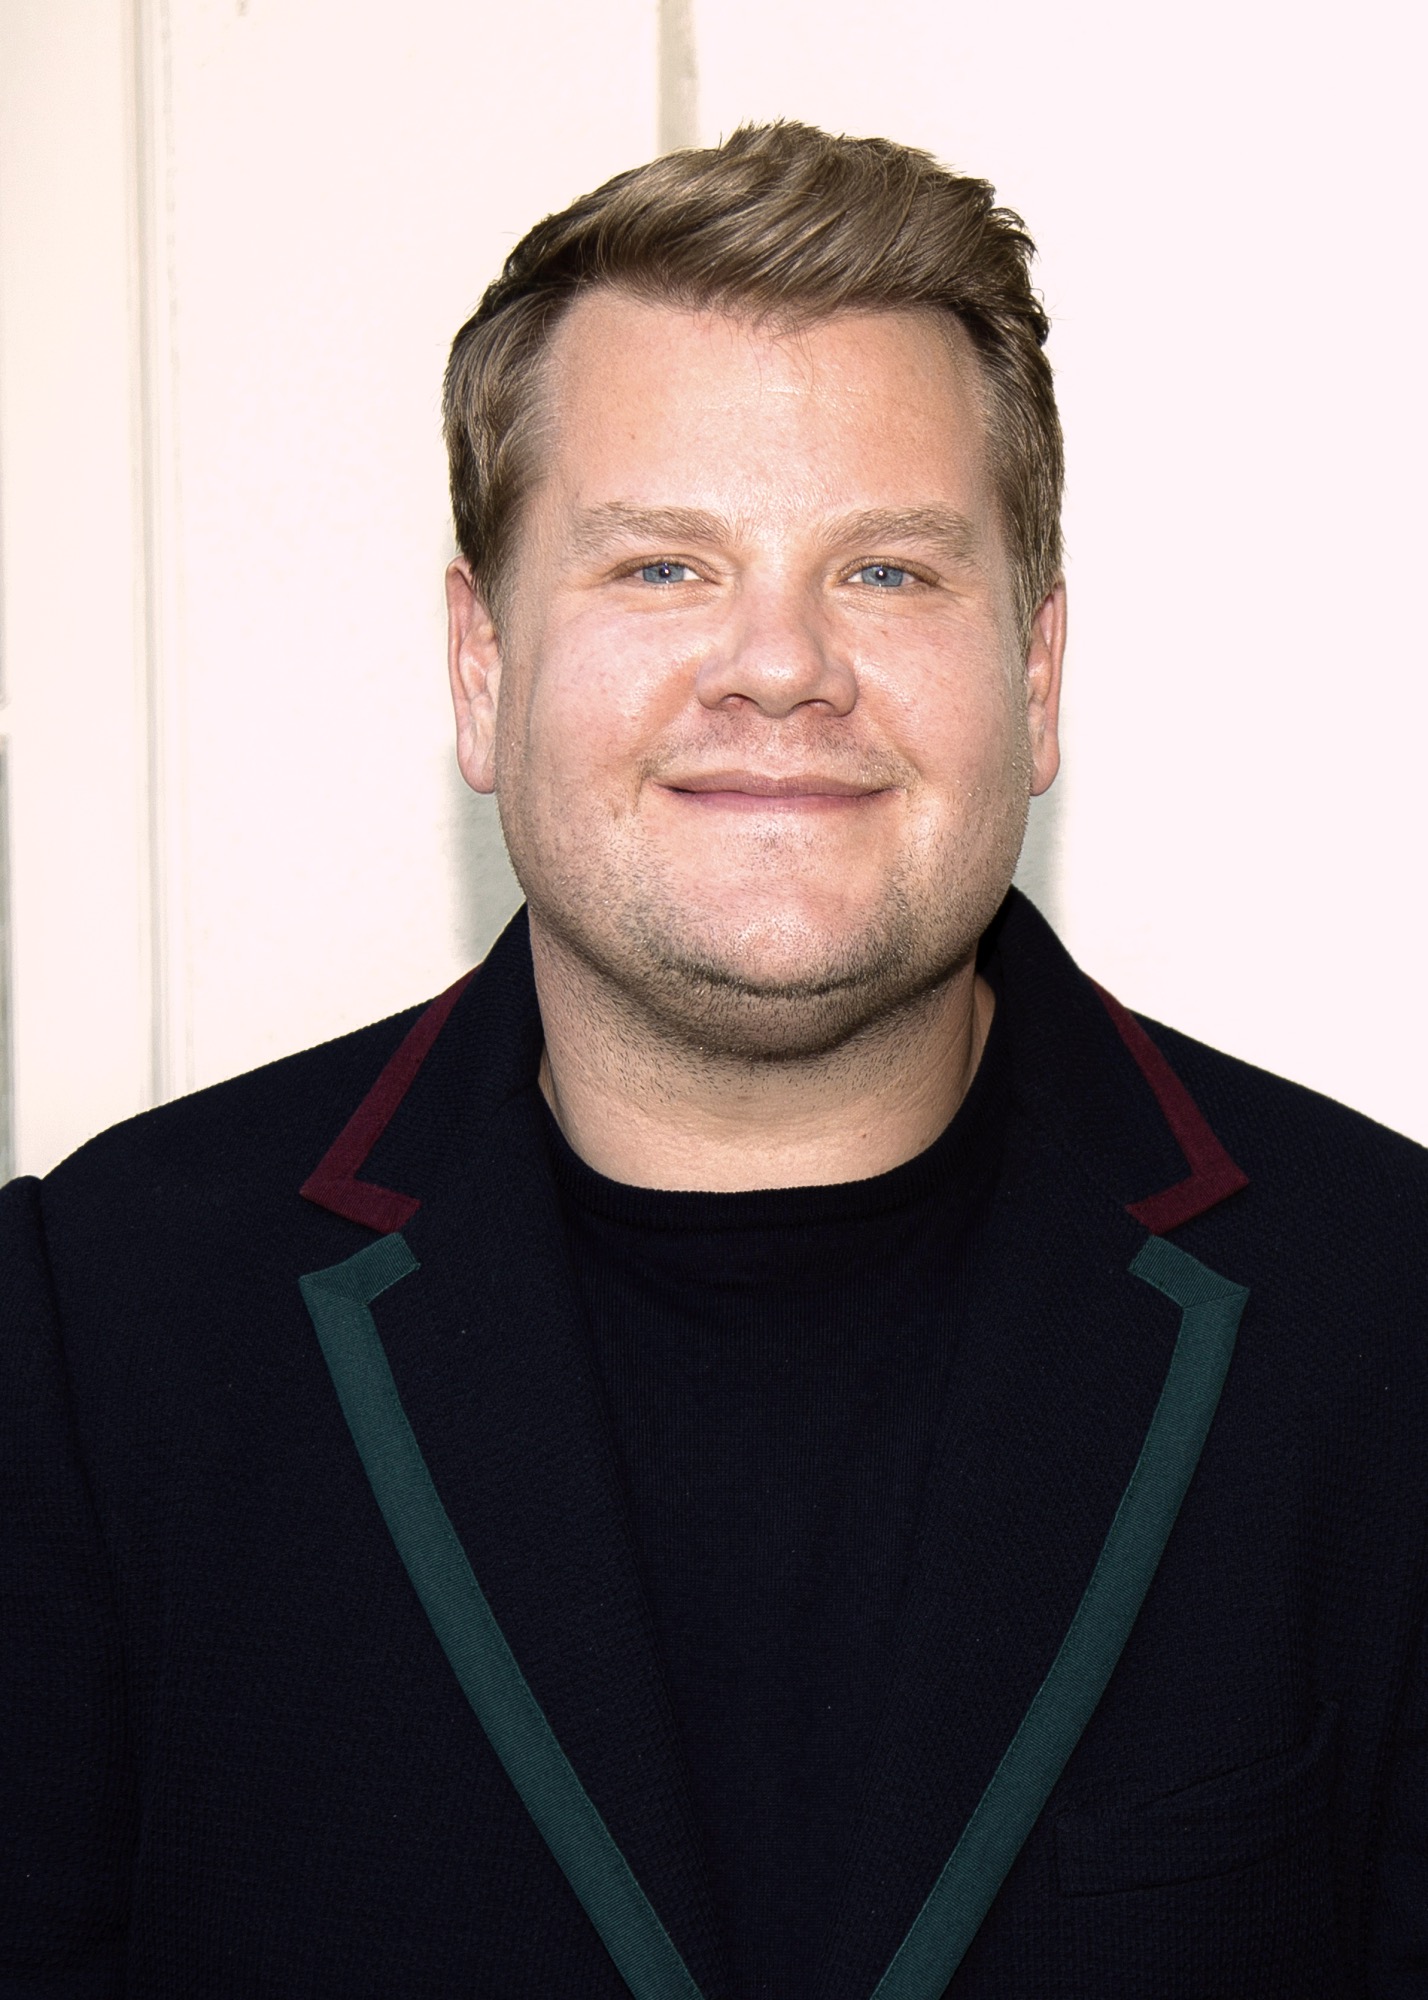 HFPA In Conversation: James Corden Believes in the Power of Laughter ...